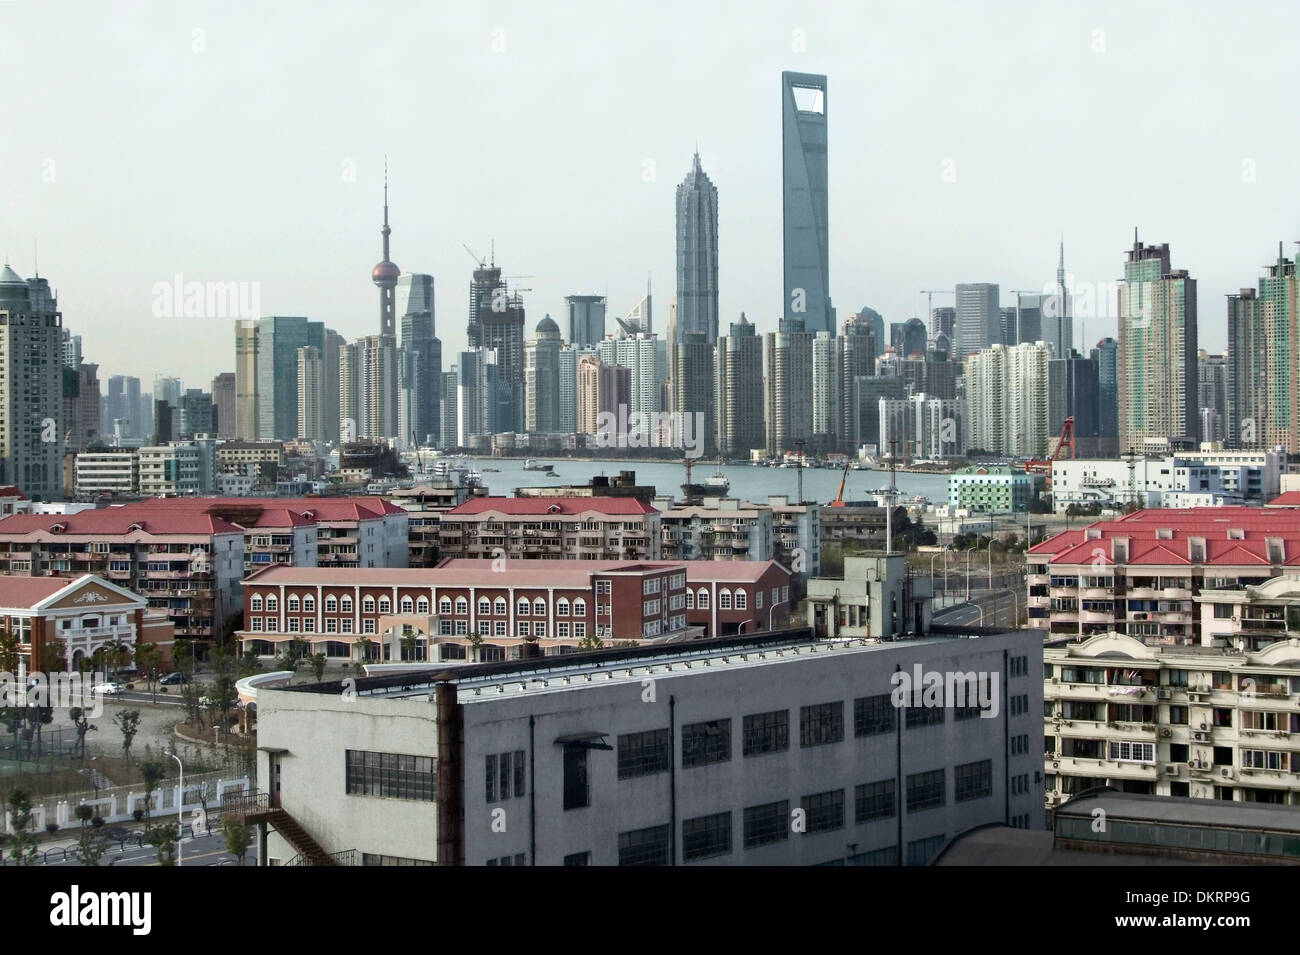 city view showing the skyline of Pudong, a district of Shanghai in China Stock Photo